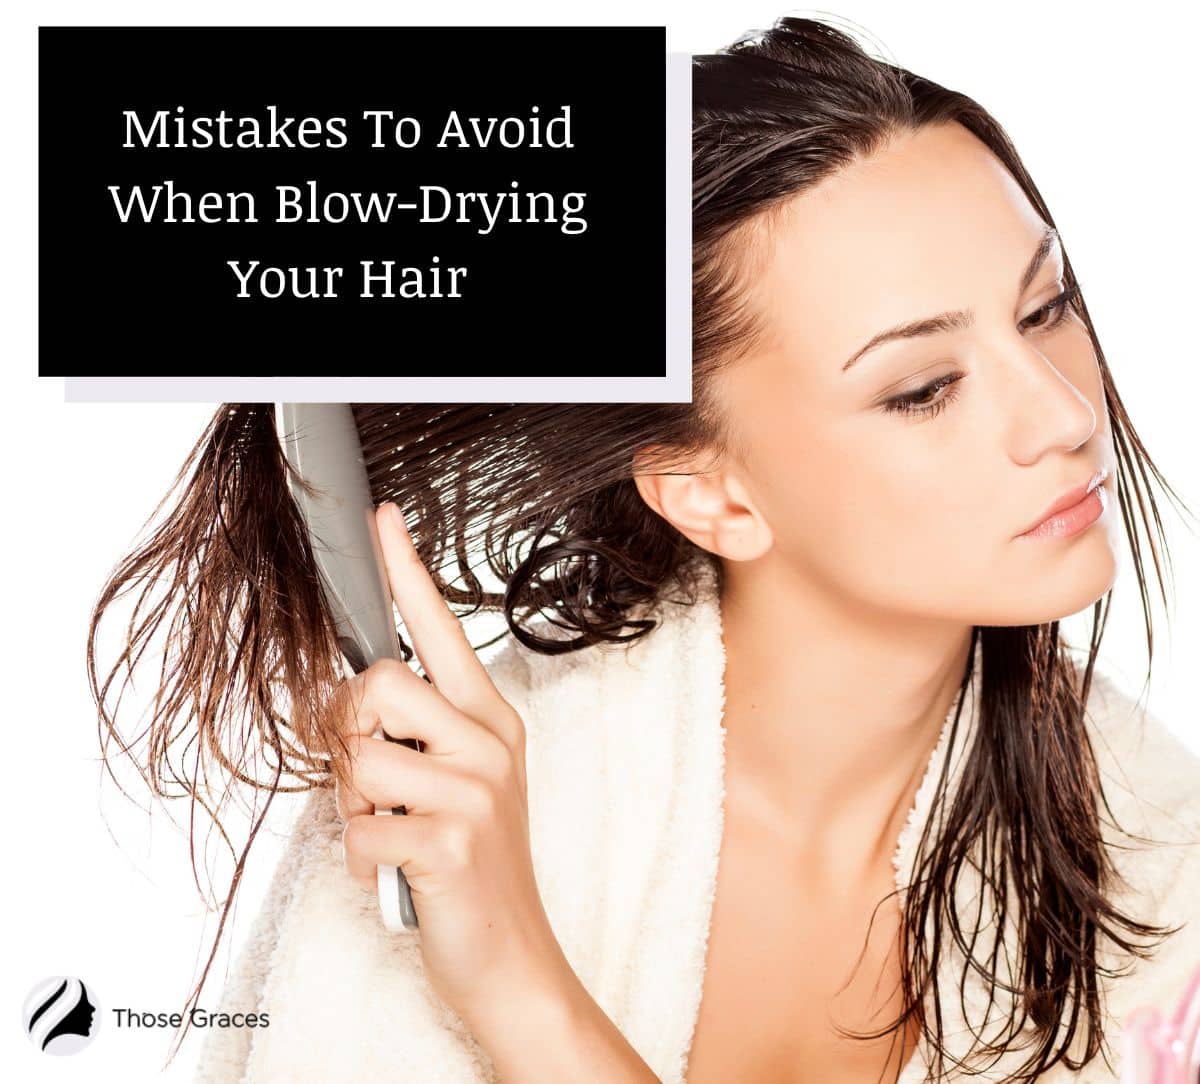 lady brushing her hair while wet, some of the mistakes you should be aware of while blow-drying your hair